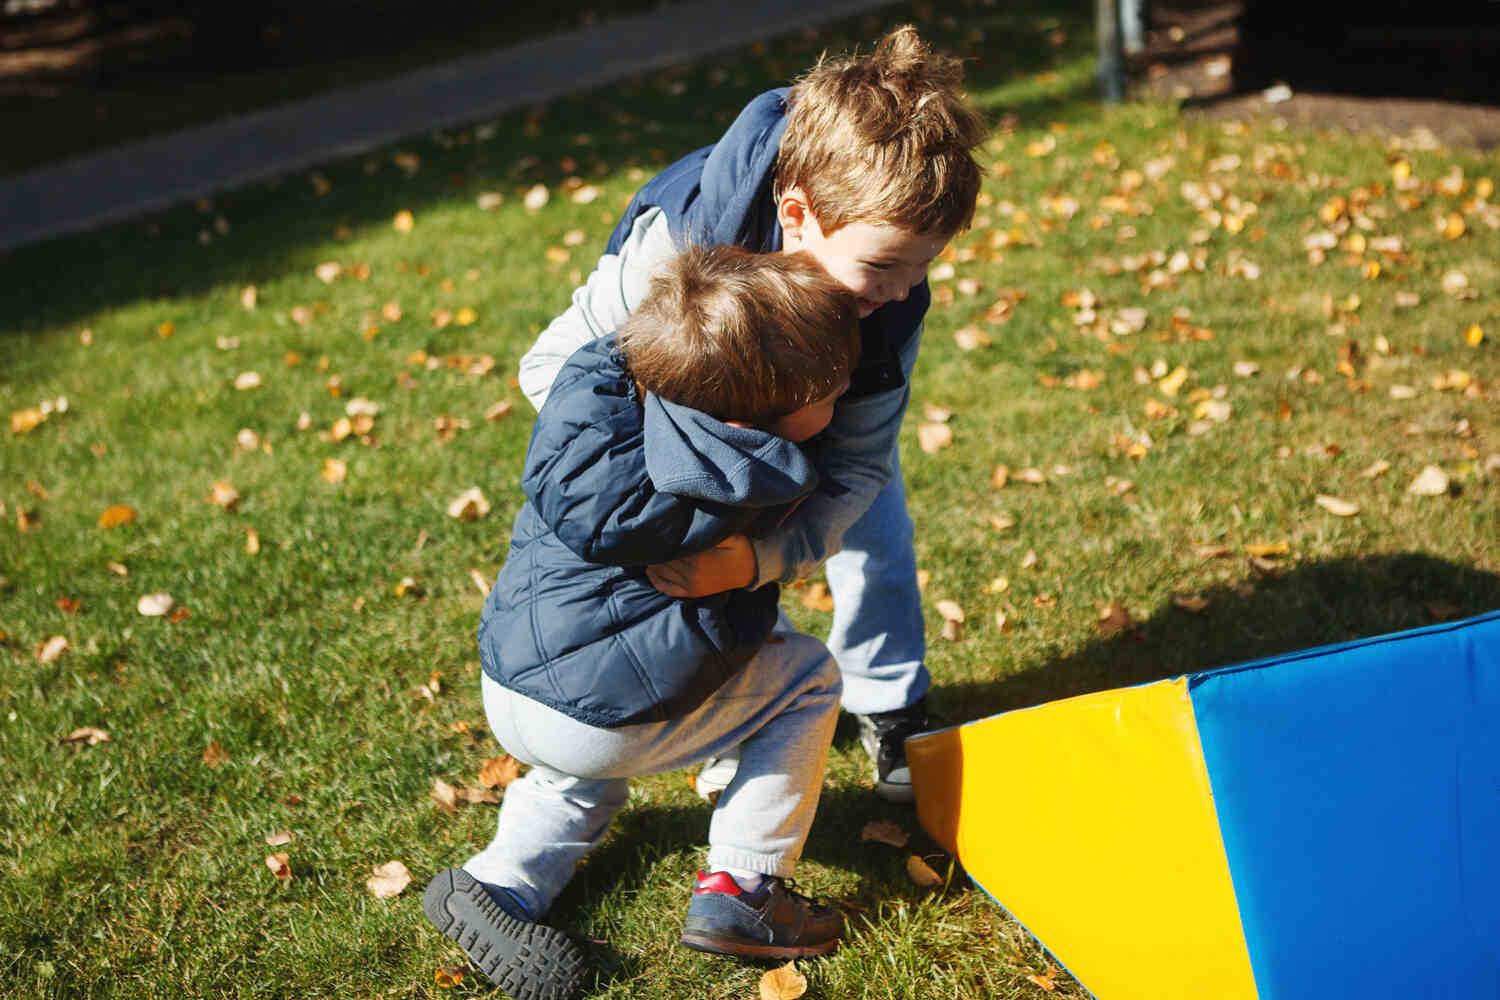 A toddler fighting with another boy